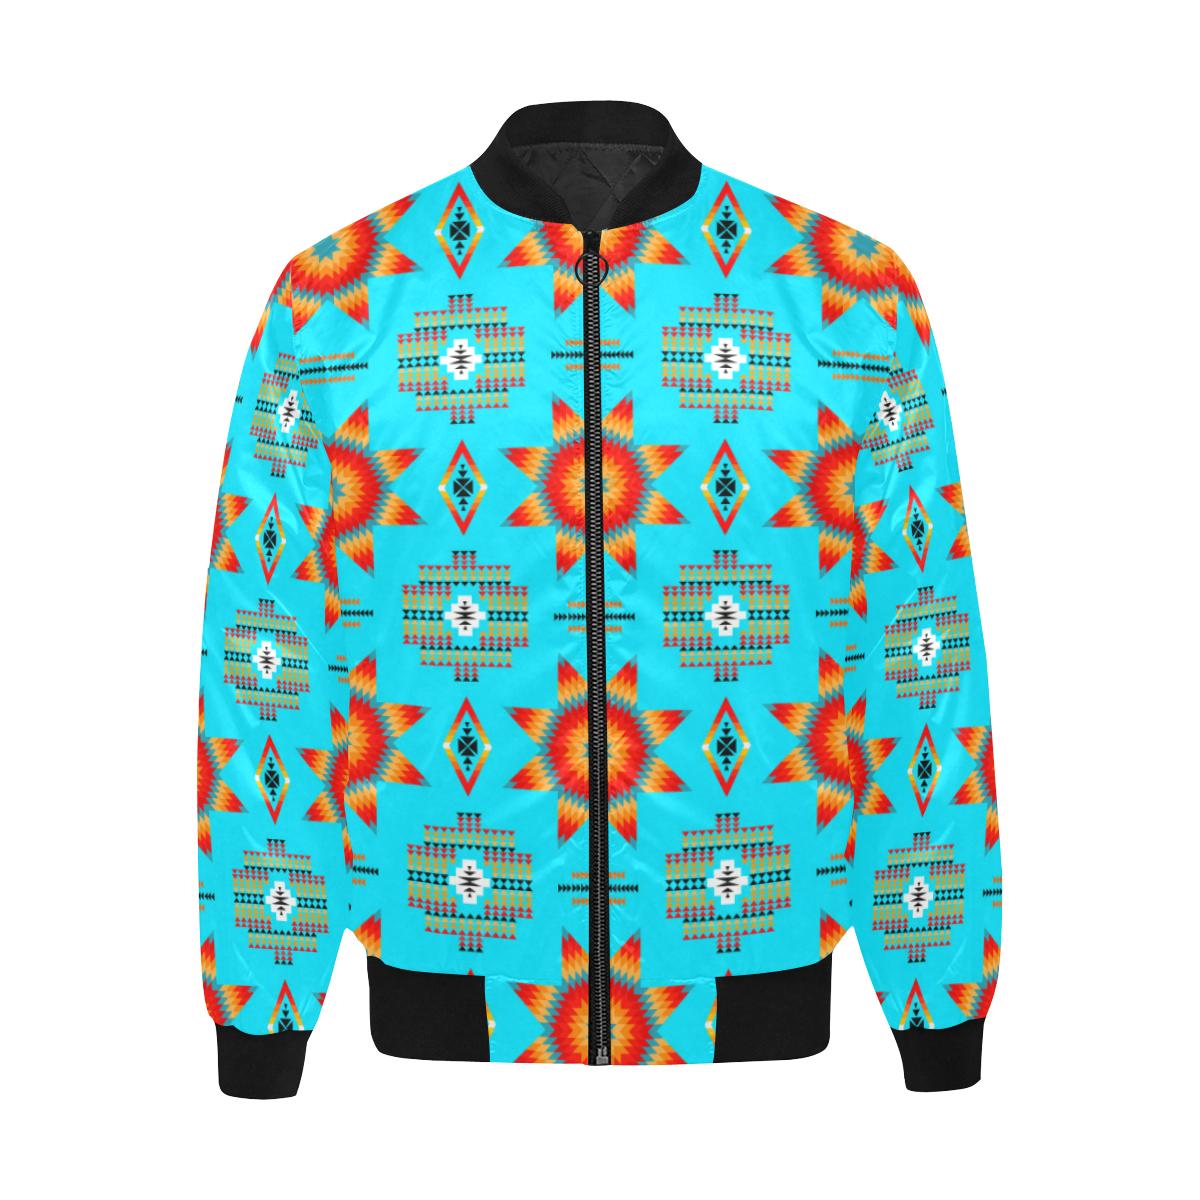 Rising Star Harvest Moon Unisex Heavy Bomber Jacket with Quilted Lining All Over Print Quilted Jacket for Men (H33) e-joyer 